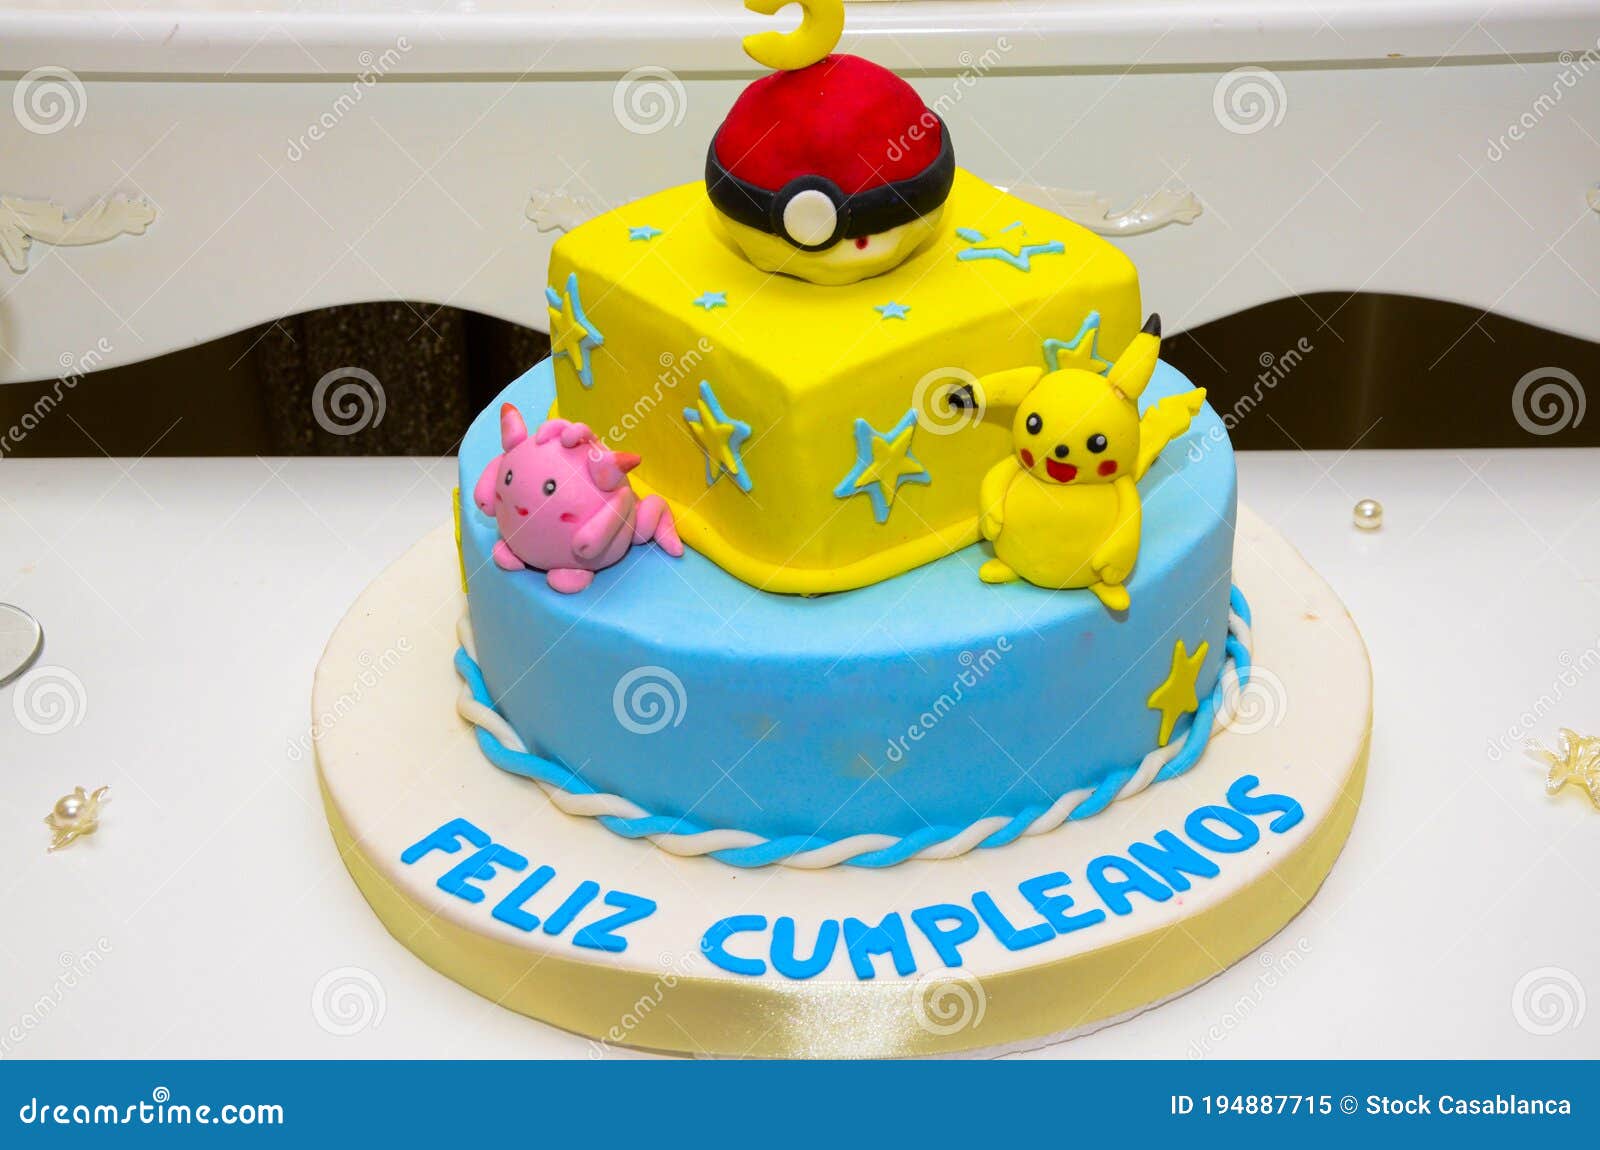 Colorful Kids Birthday Cake Decorated with Yellow Cartoon ...